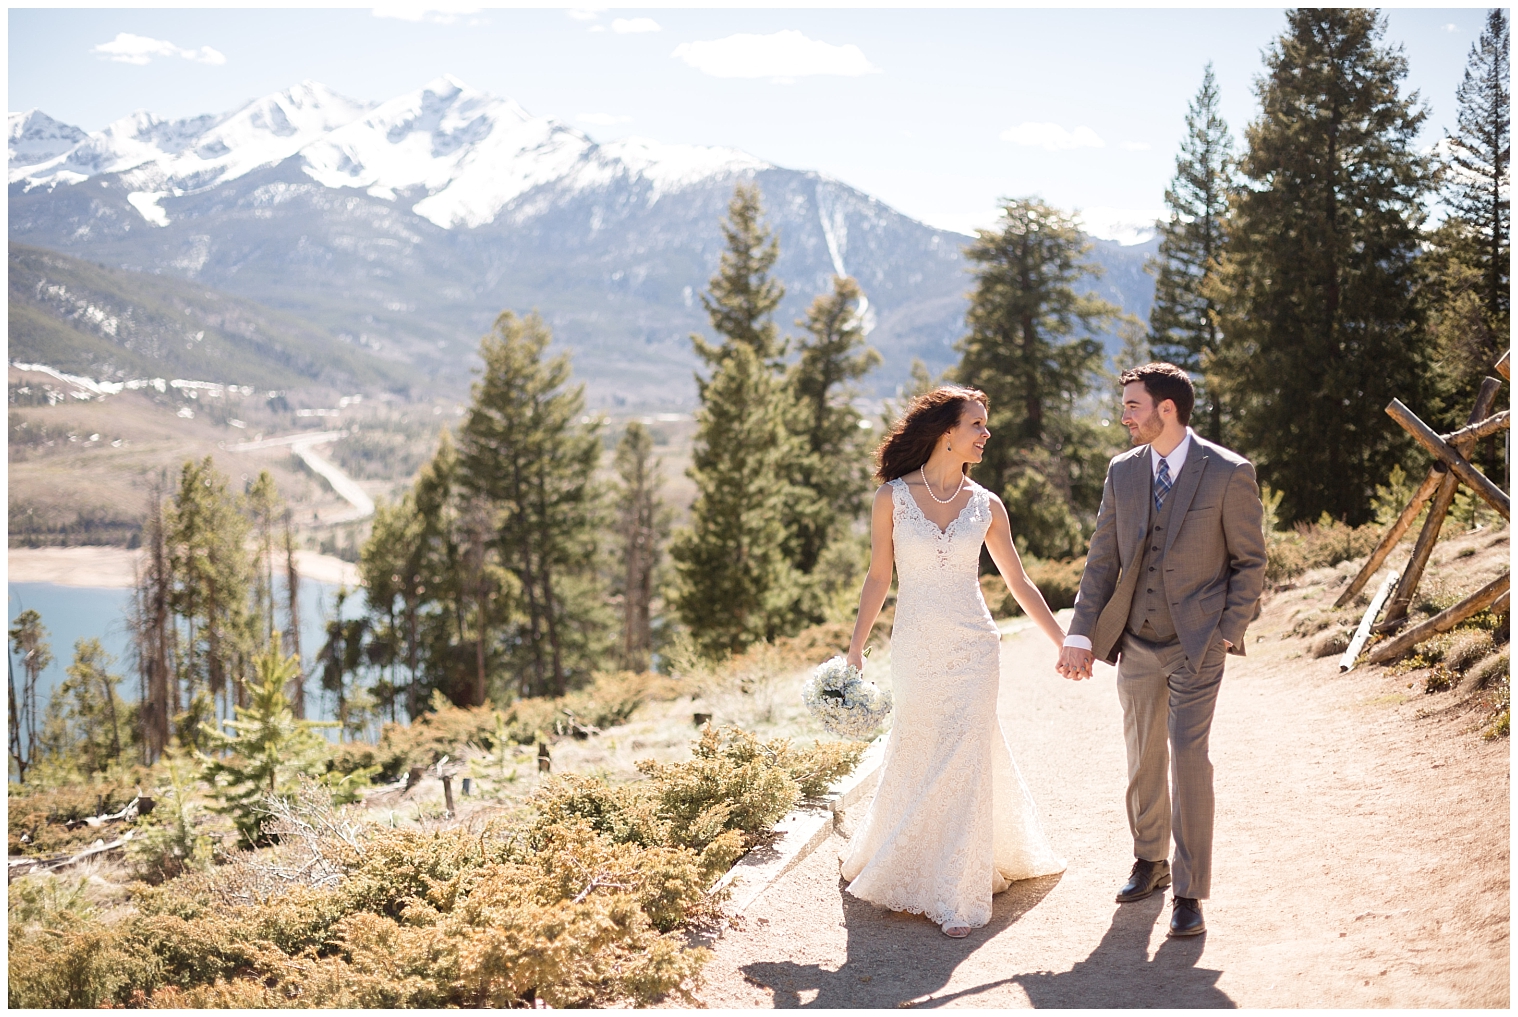 During photos with a Colorado mountain elopement photographer, the bride and groom walk hand in hand together.